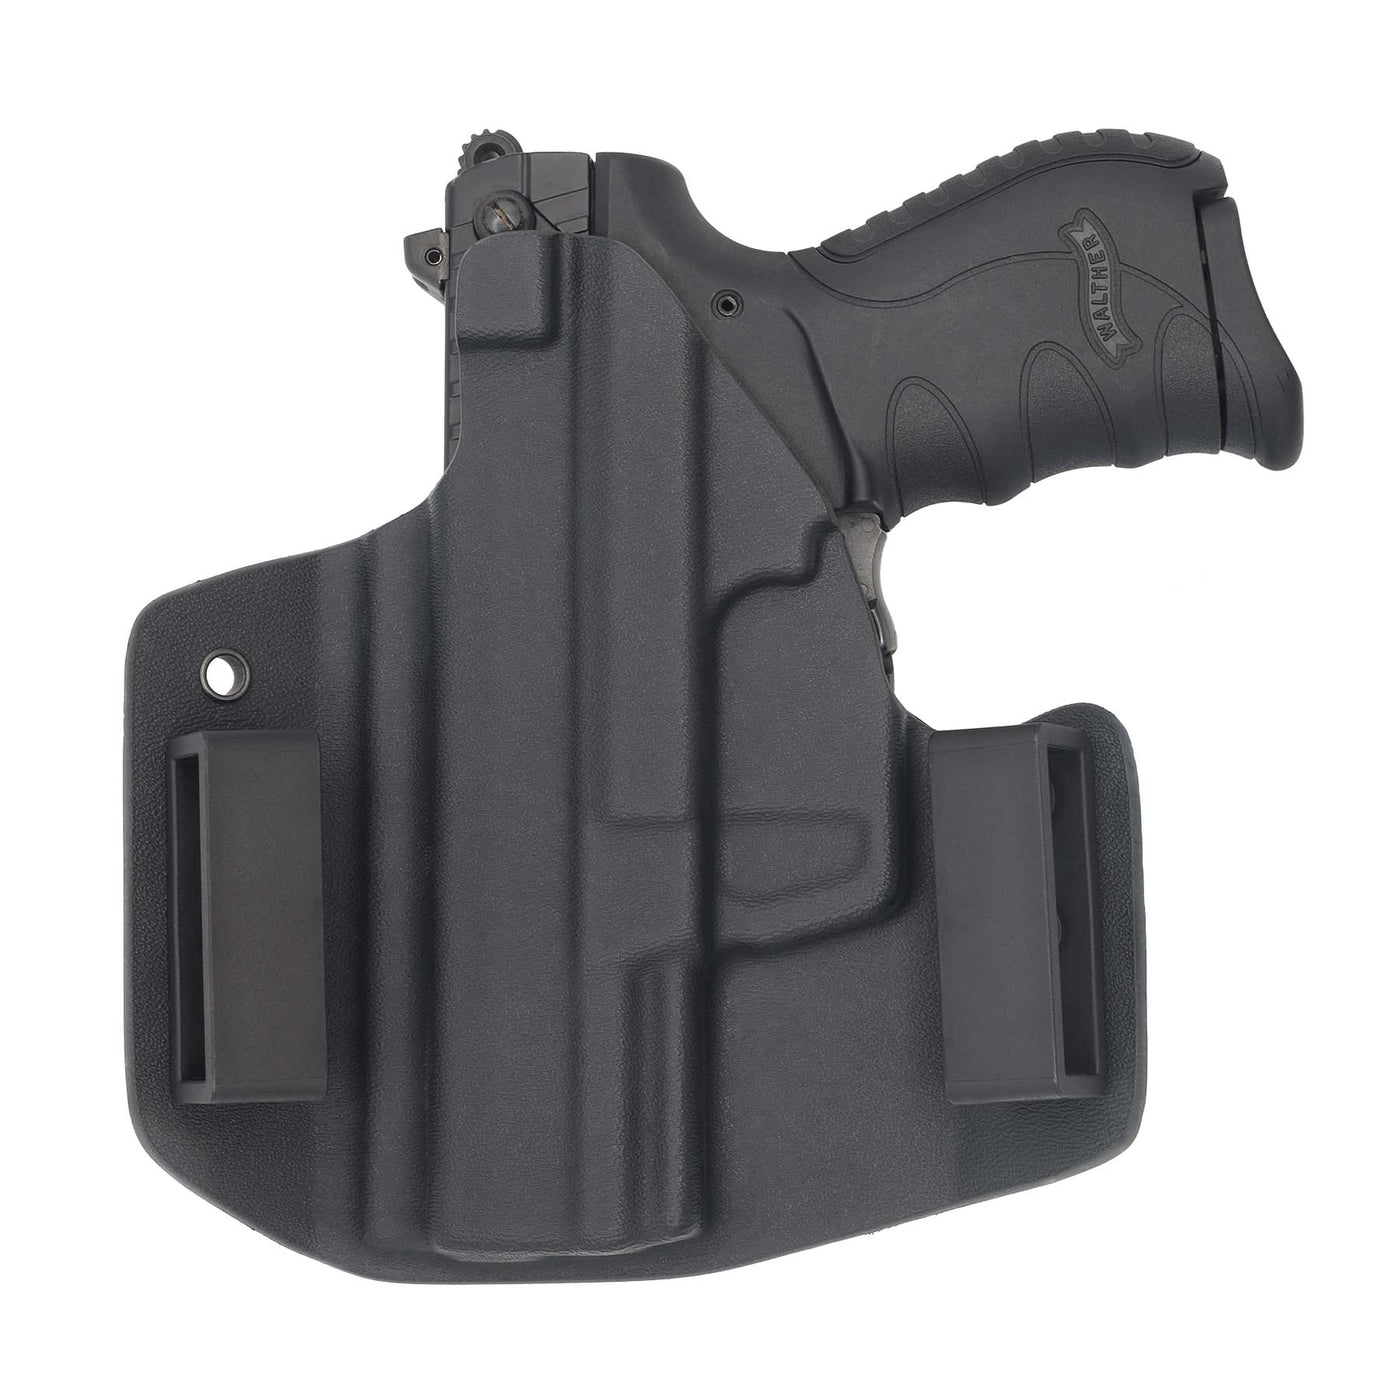 This is a C&G Holsters Covert series outside the waistband for the Walther PK380 (rear view) in right hand holstered.